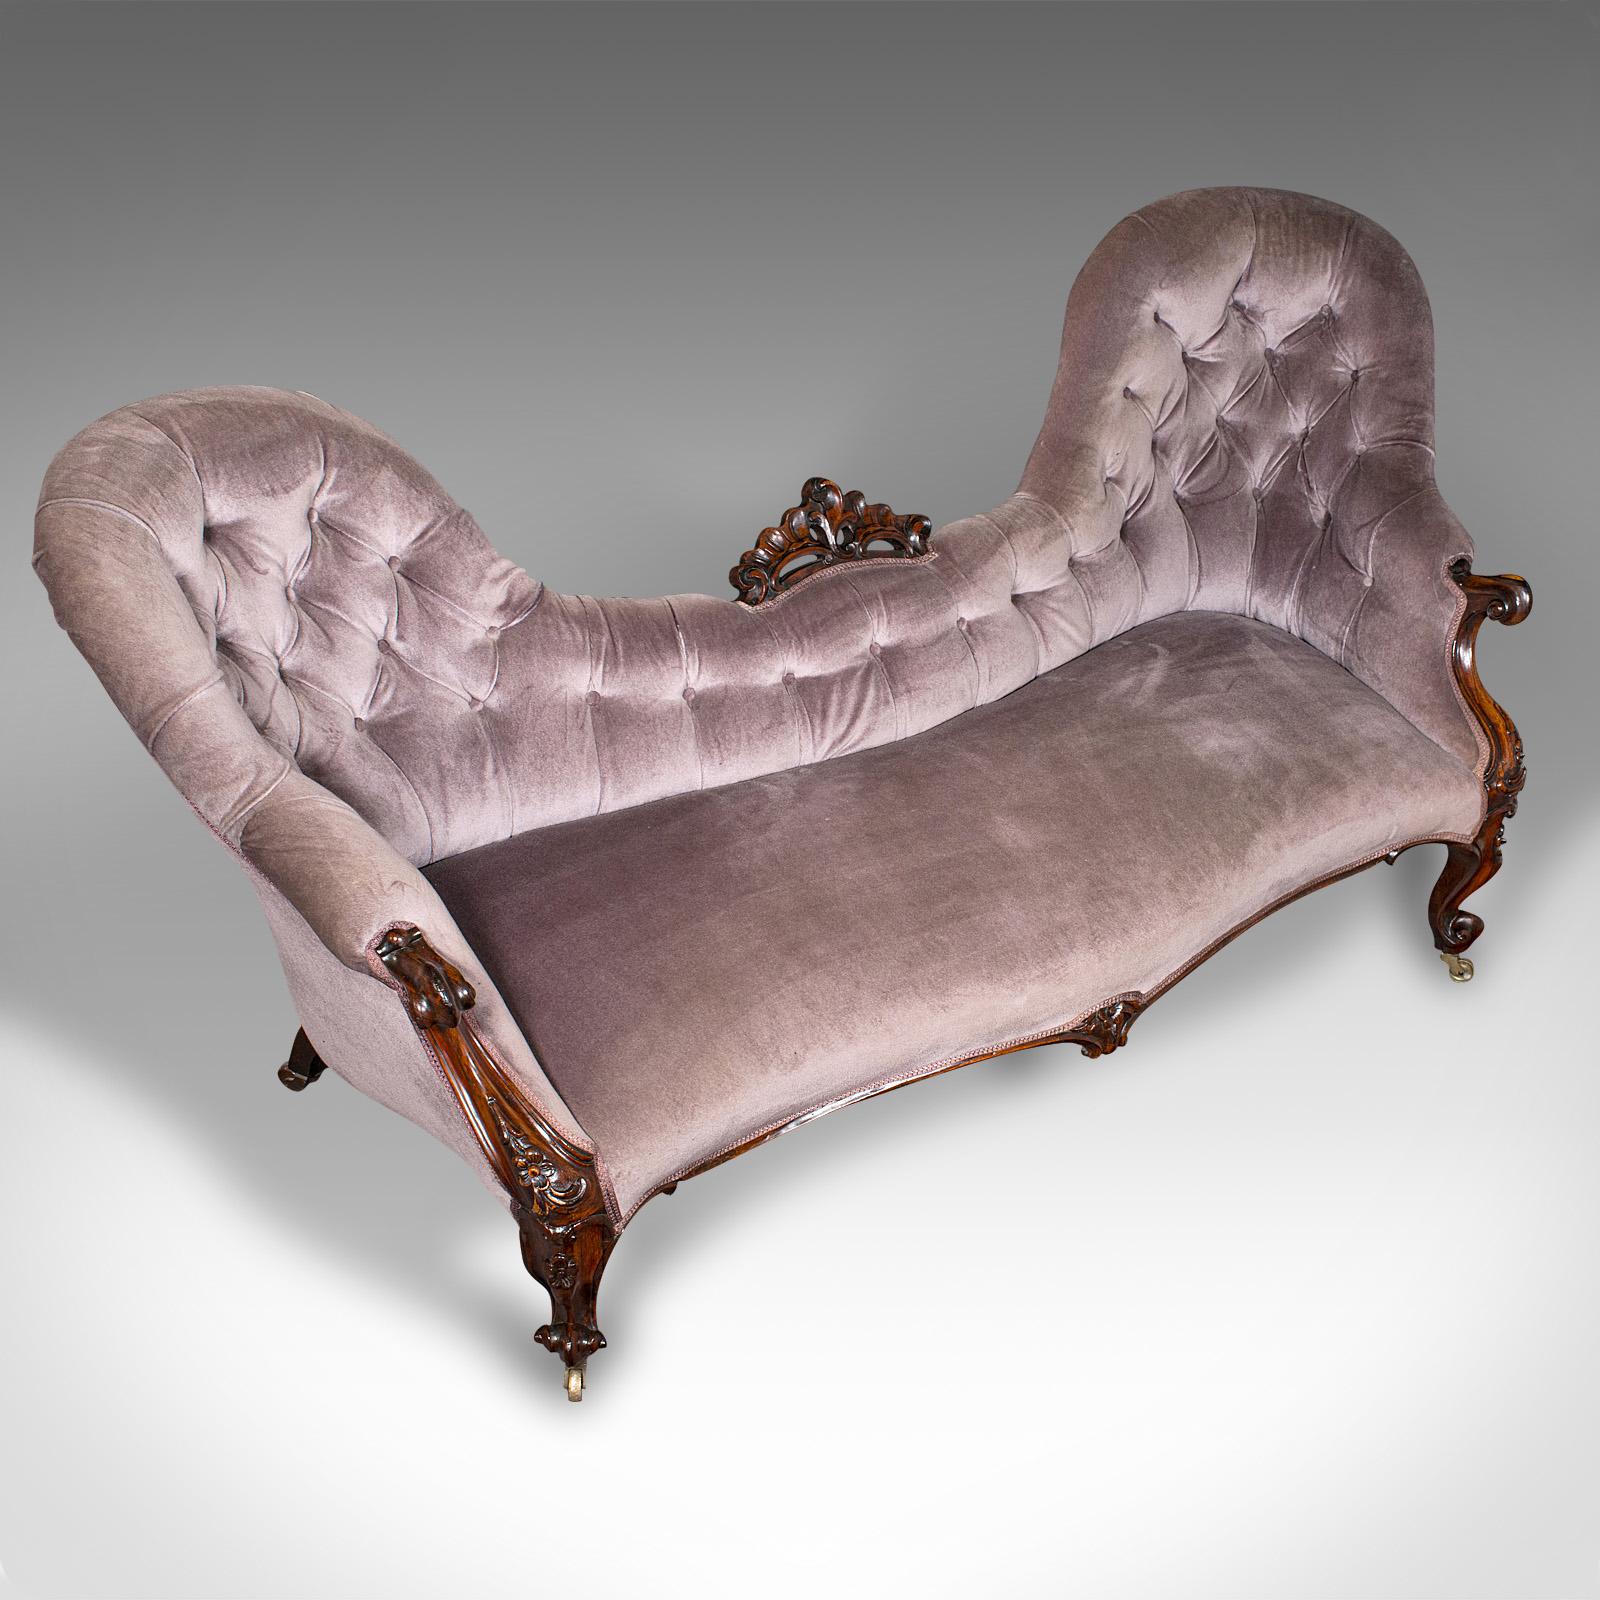 19th Century Antique Double Spoon Back Settee, English, 3 Seat, Sofa, Early Victorian, C.1840 For Sale